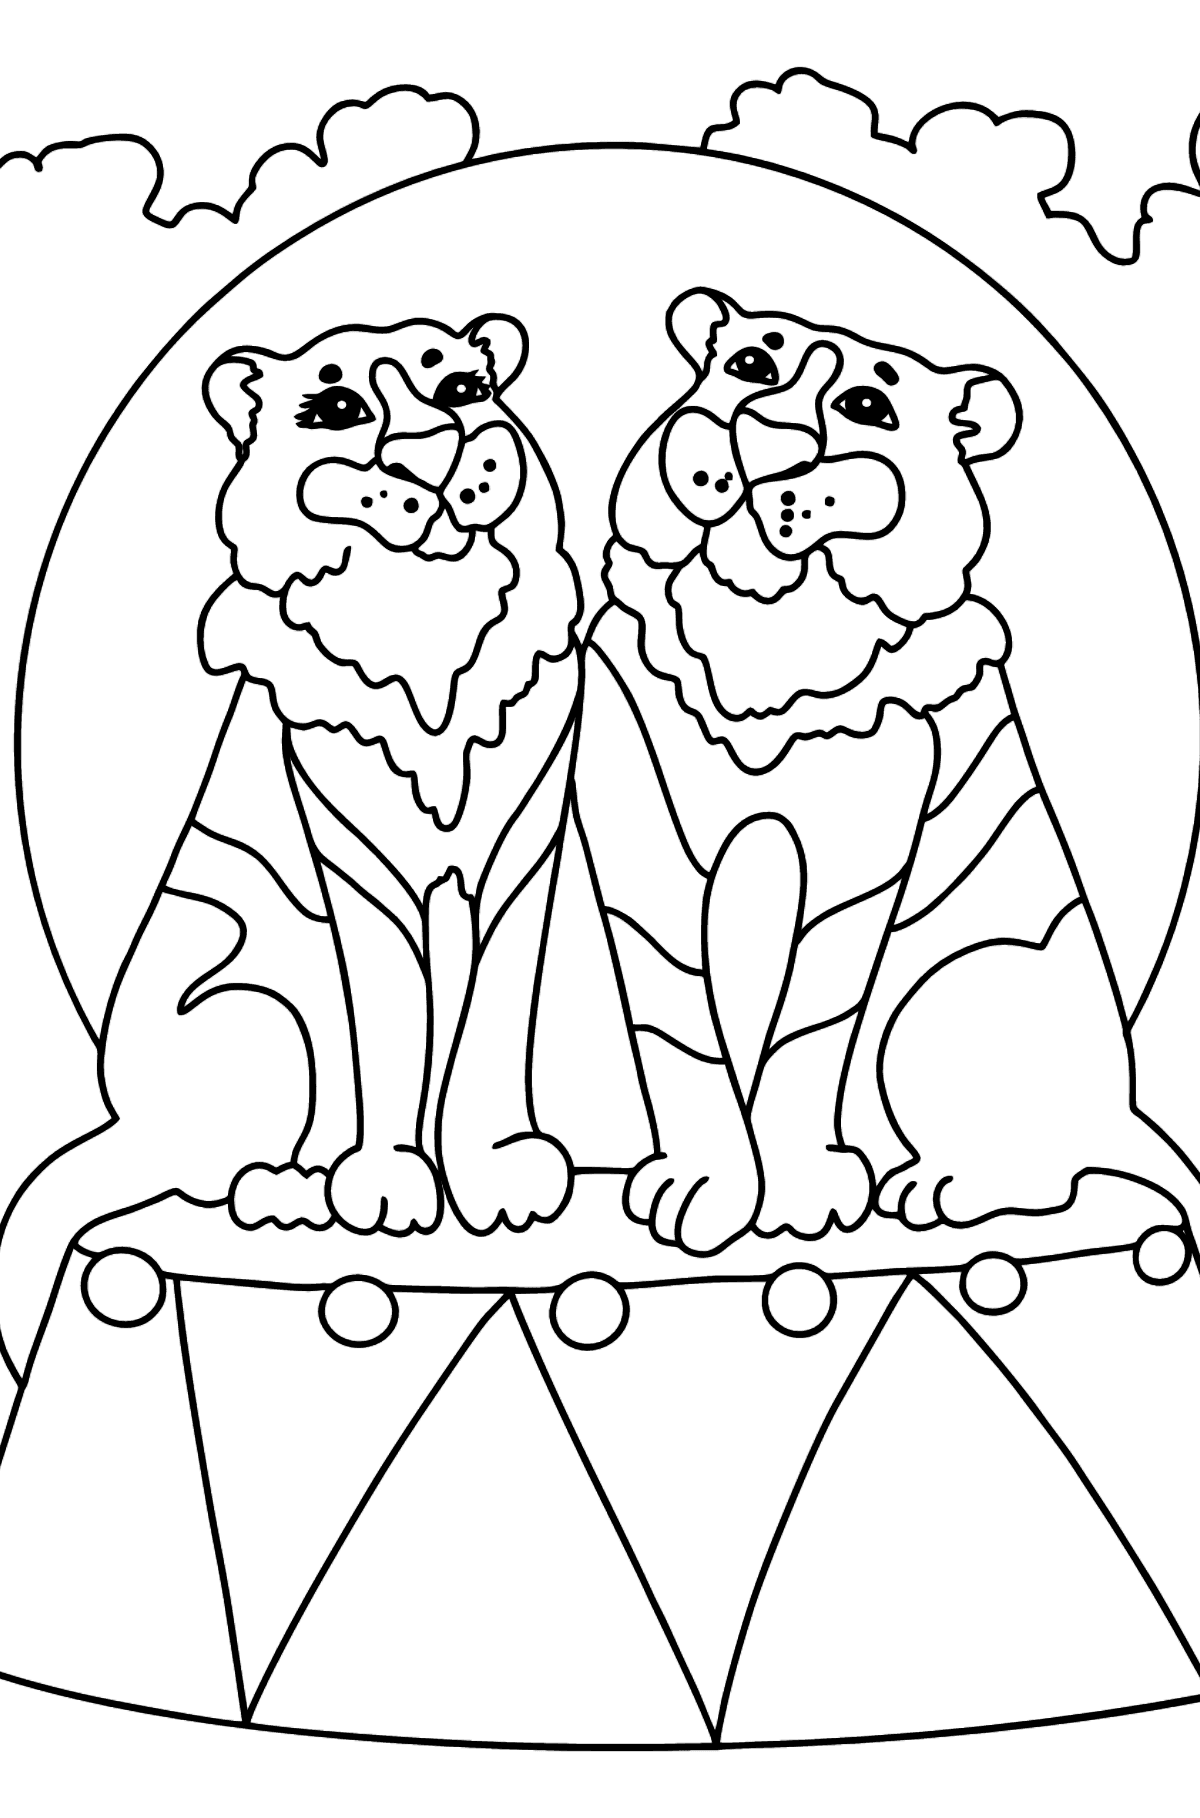 Coloring Page - A Tiger is Performing in a Circus - Coloring Pages for Kids